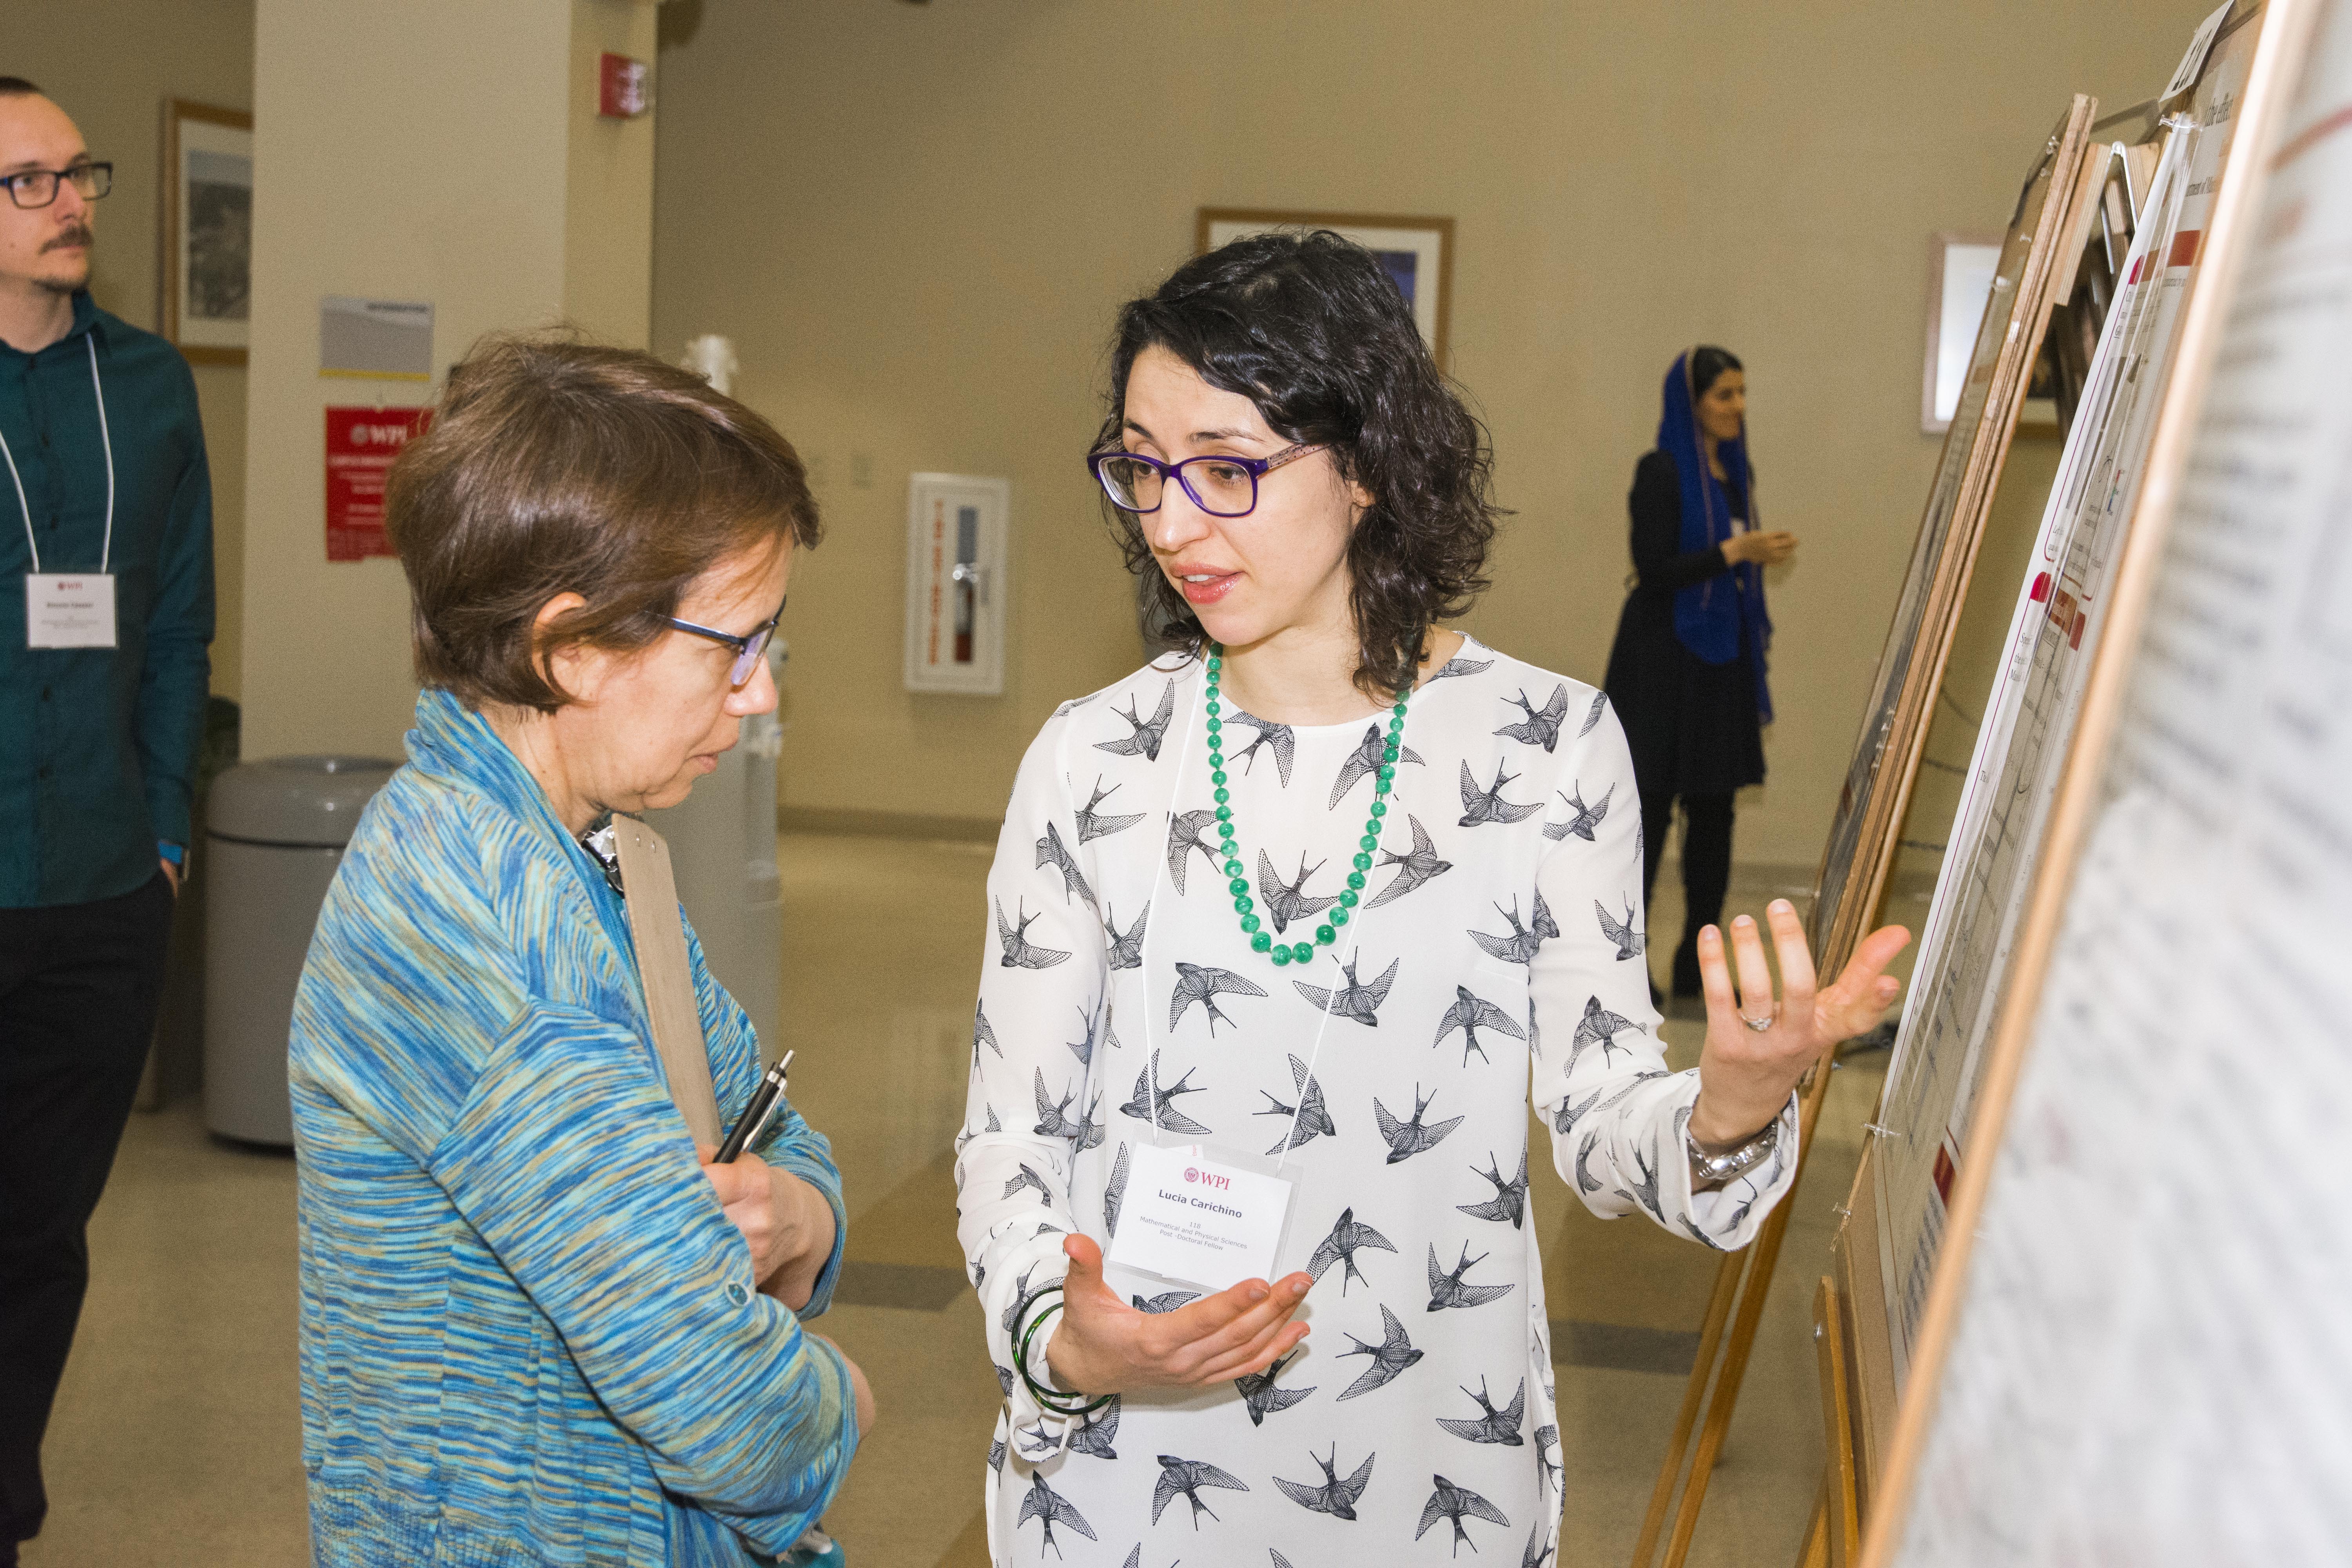 A student describes her work to a judge while gesturing toward her poster board.